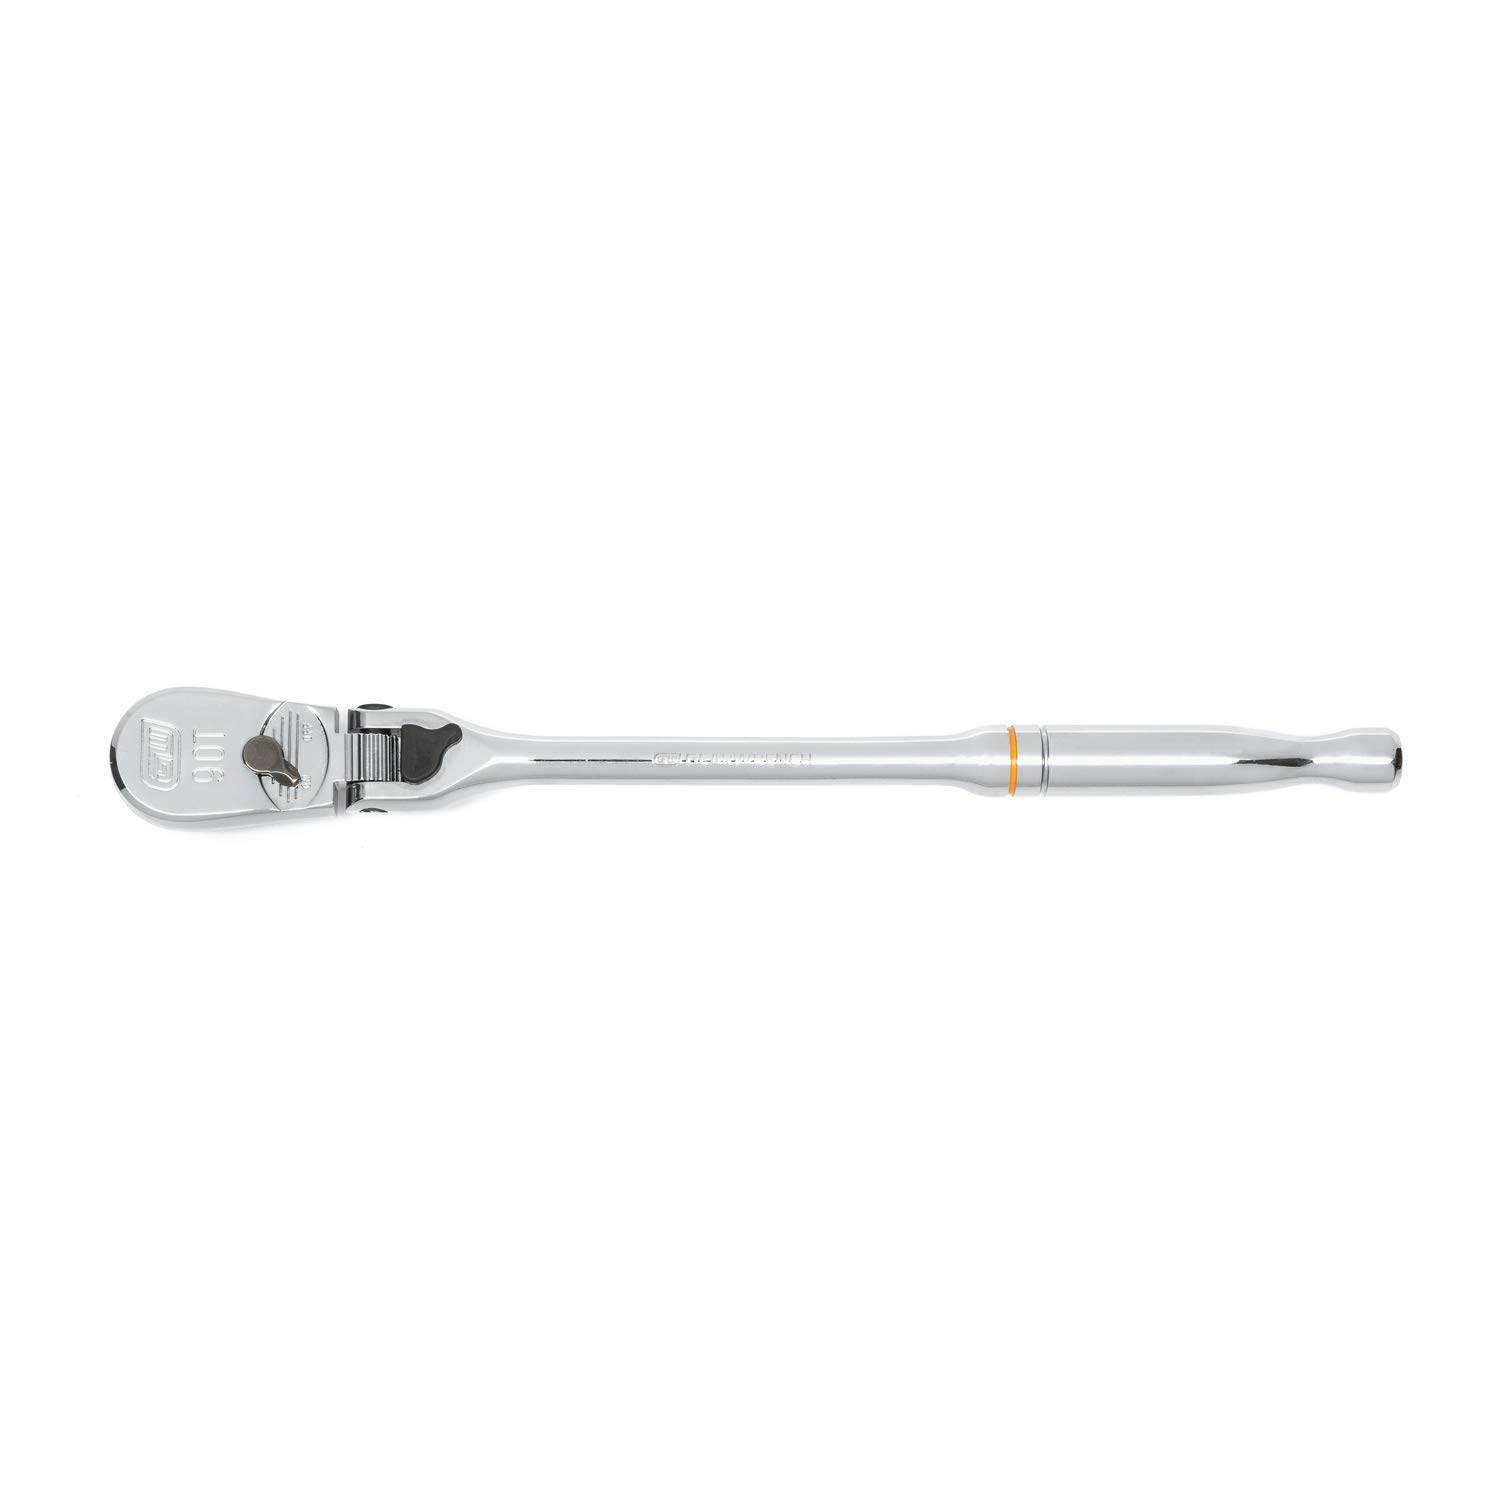 Gearwrench 3/8" Drive 90 Tooth Locking Flex Head Ratchet 11" 81266T $26.85